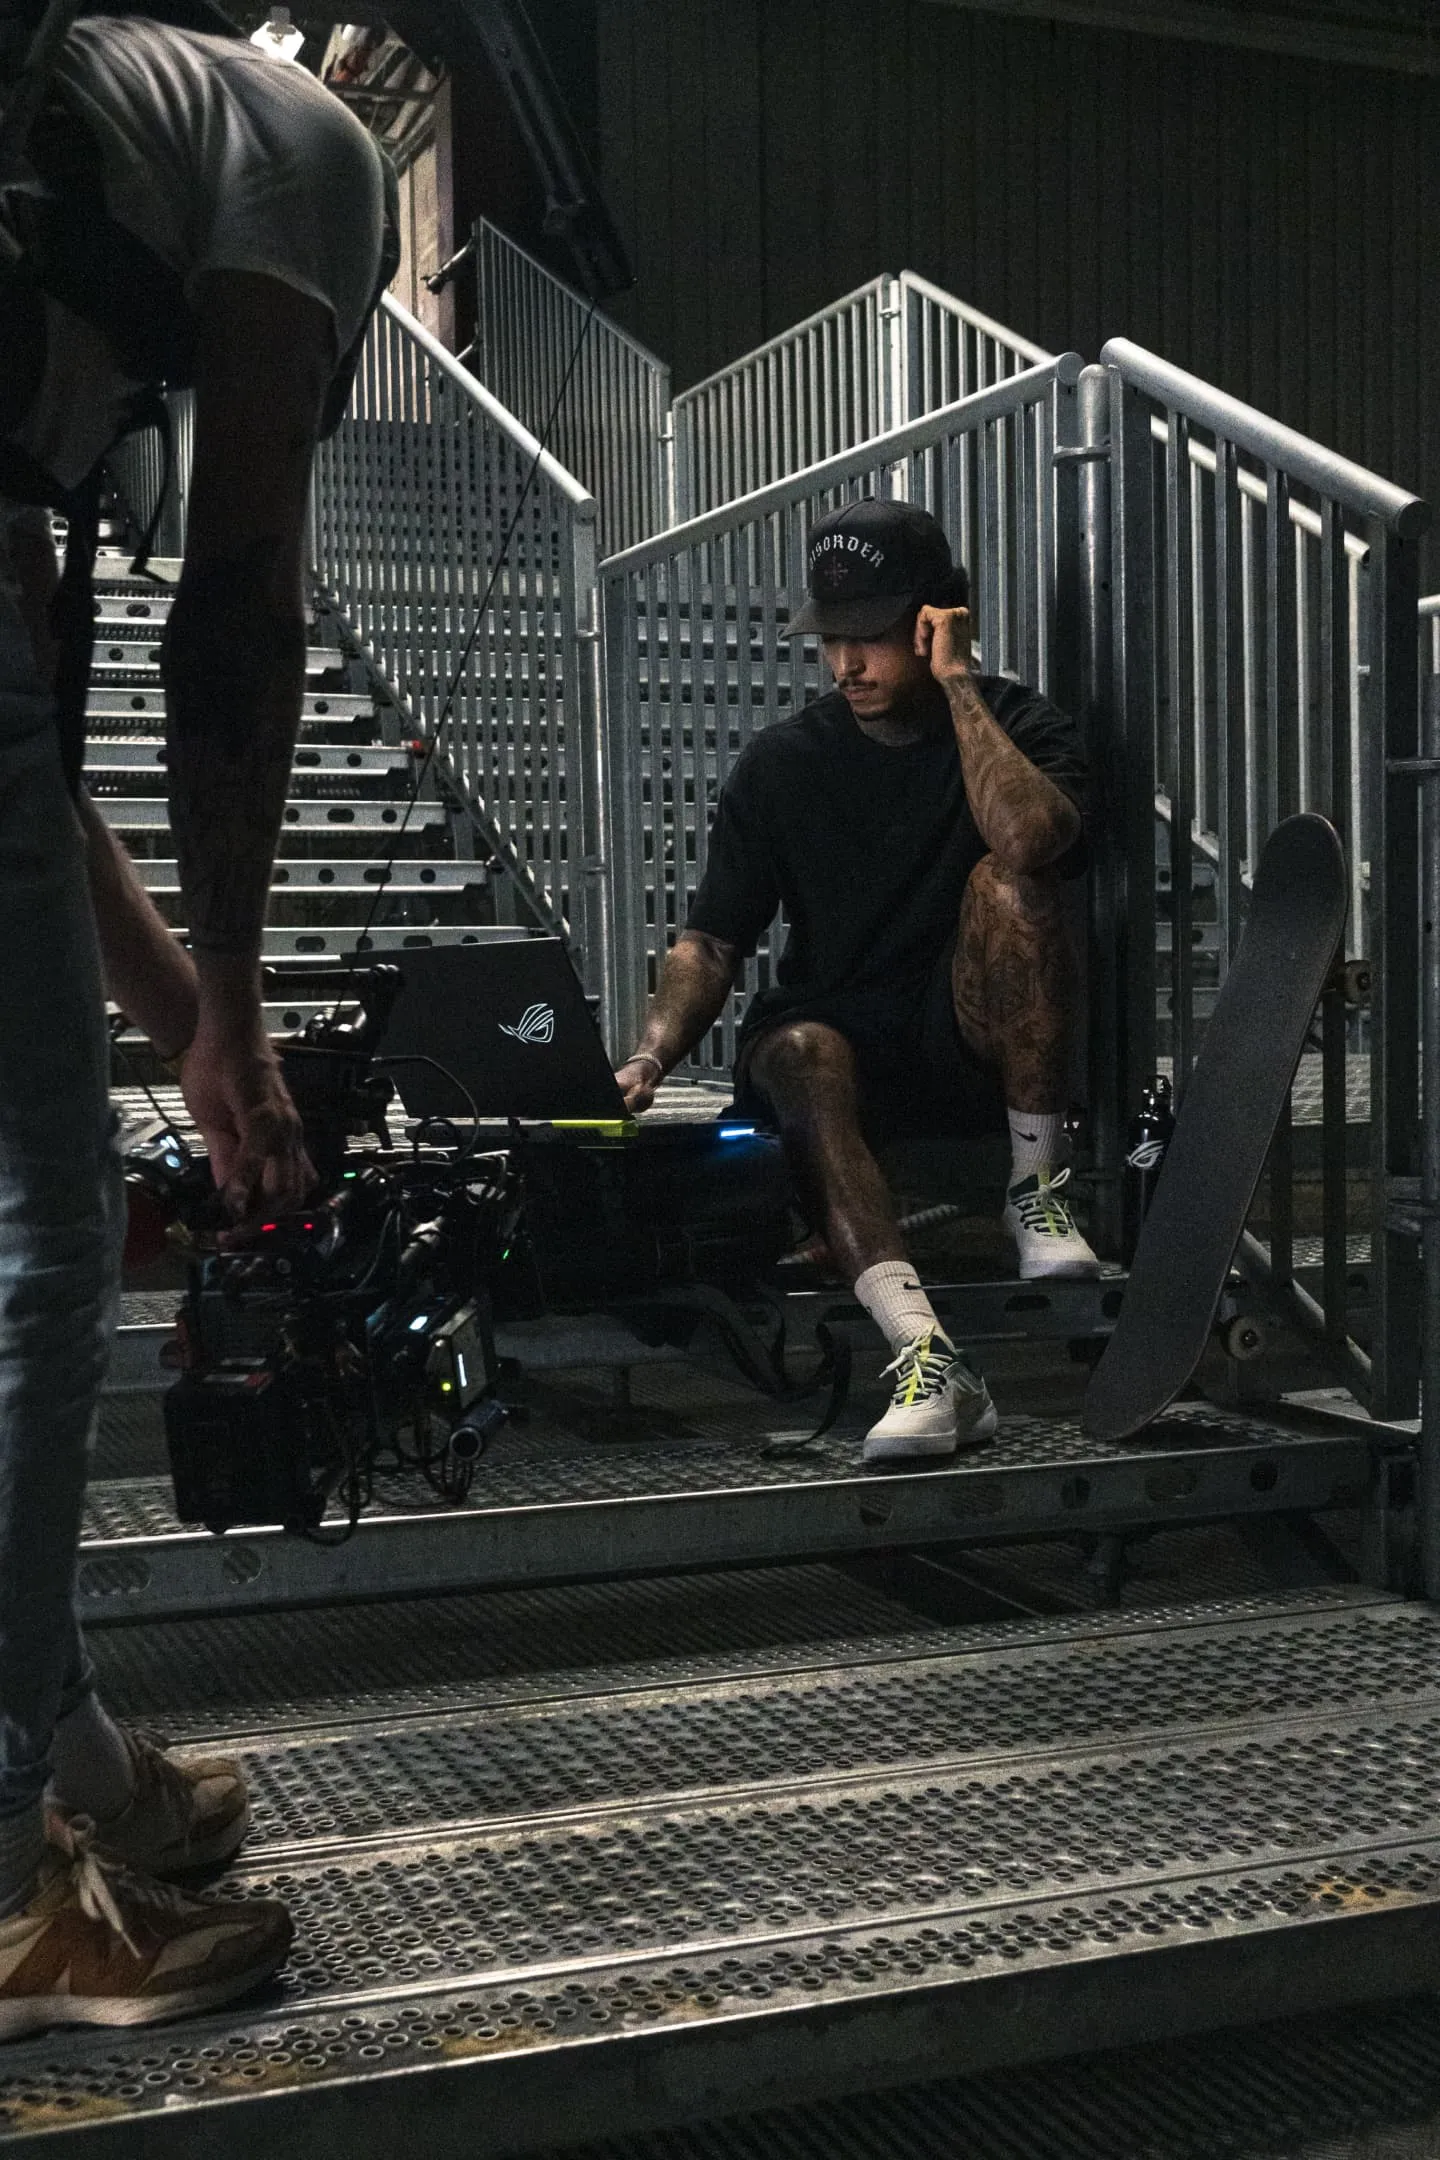 Nyjah Huston on set, being photographed on the stairs while using a ROG Strix G15 laptop.